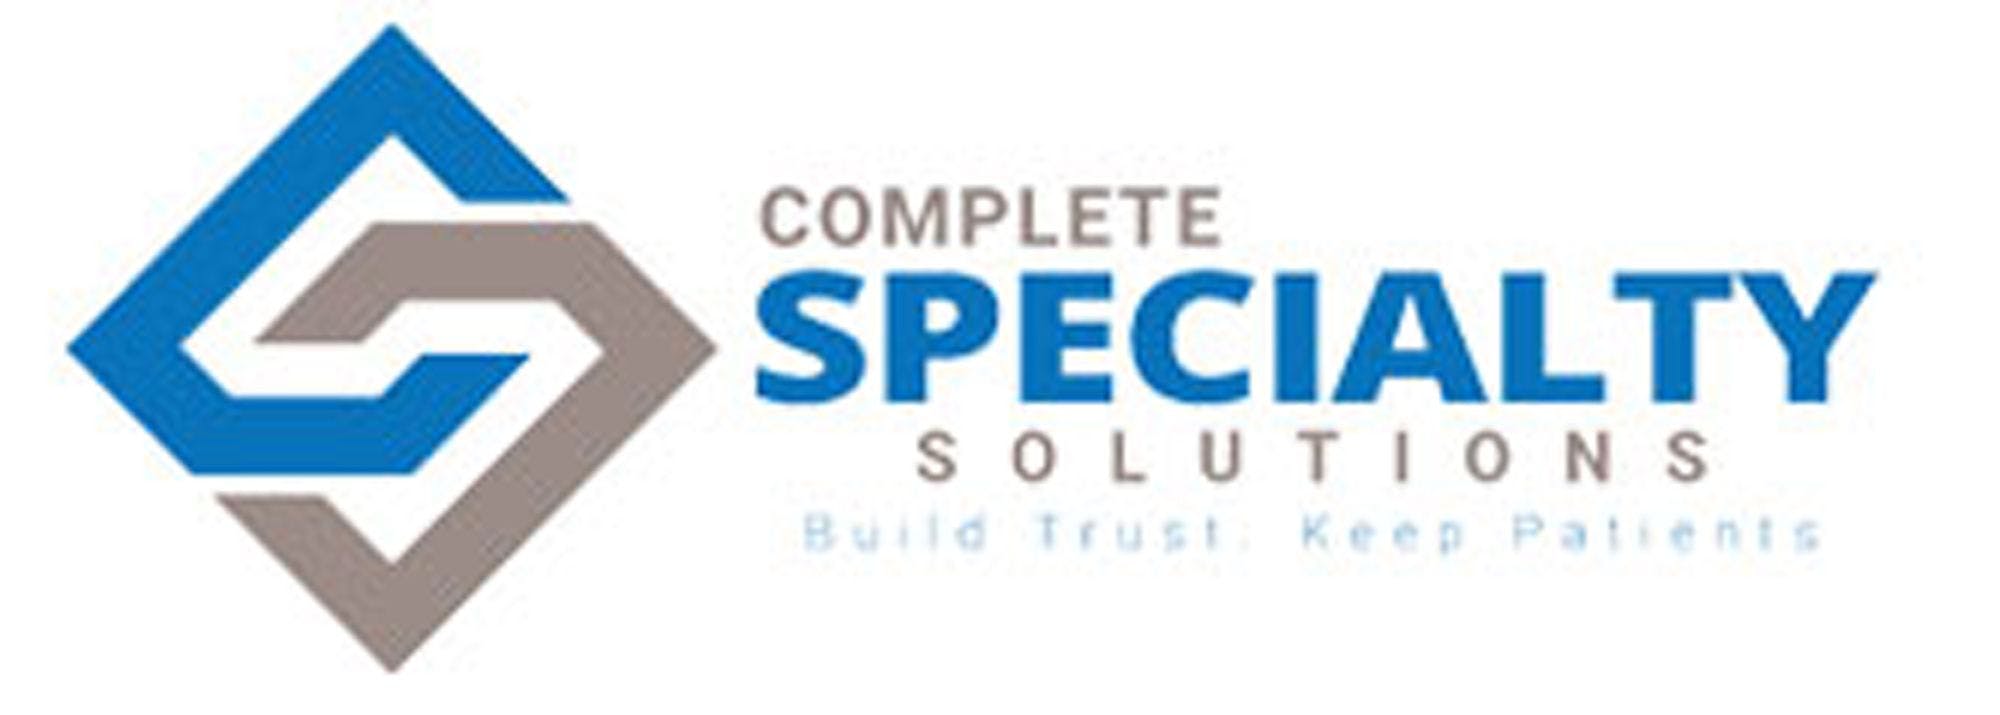 Complete Specialty Solutions Announces Launch of Stream Dental Software